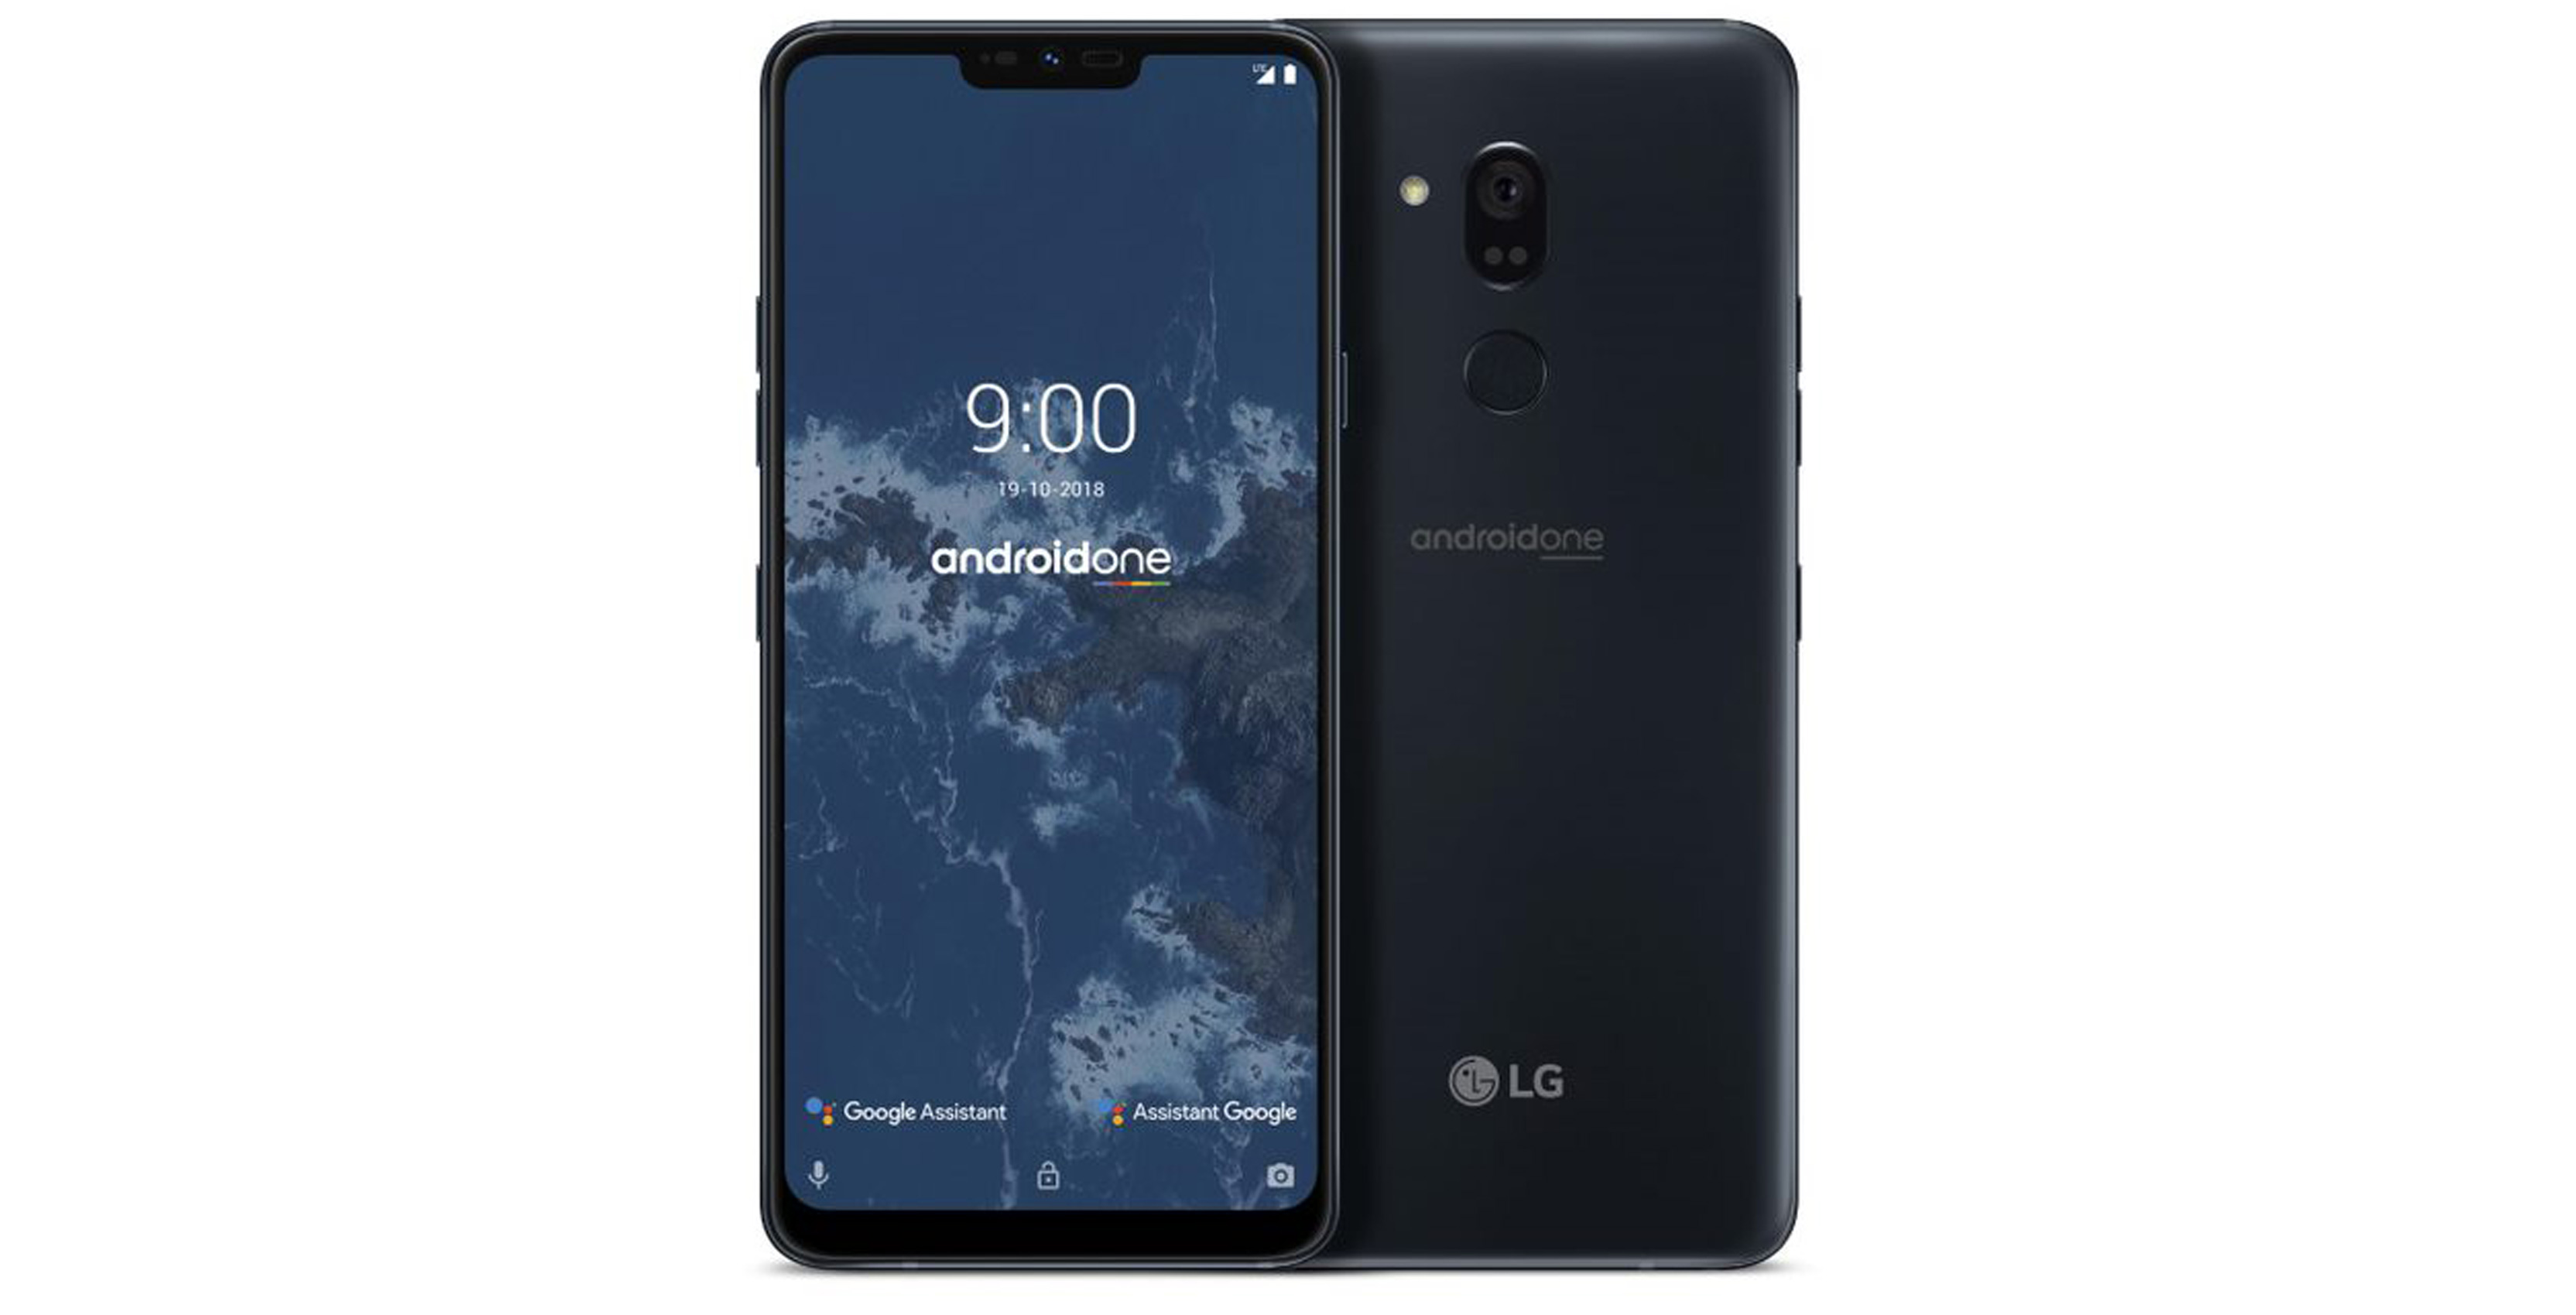 The LG G7 One is coming to Canada later this year